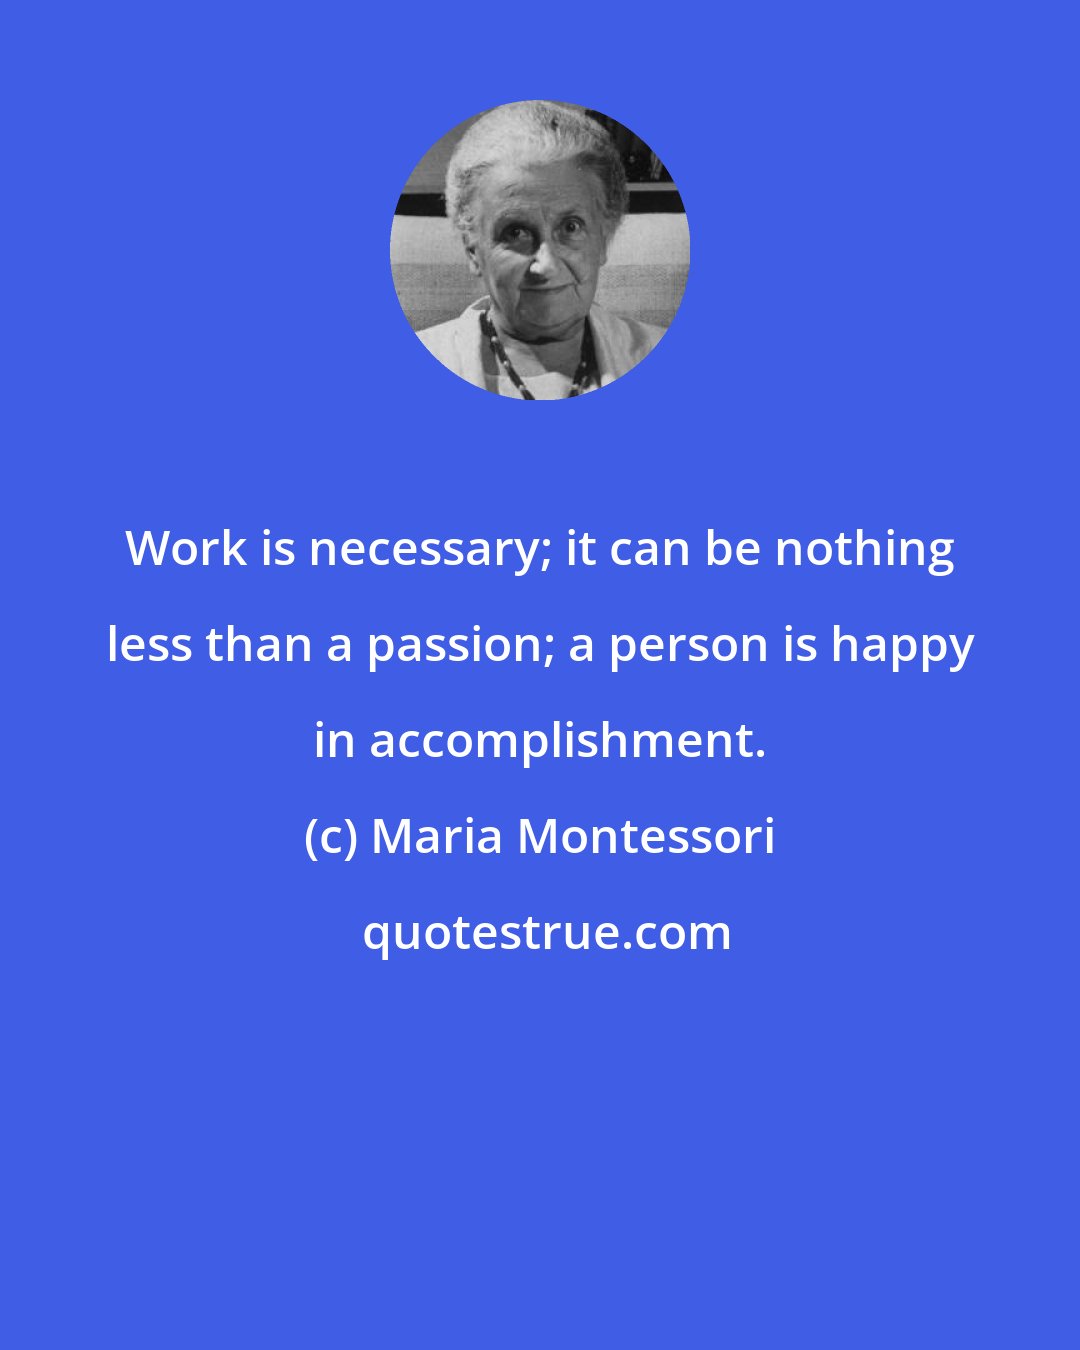 Maria Montessori: Work is necessary; it can be nothing less than a passion; a person is happy in accomplishment.